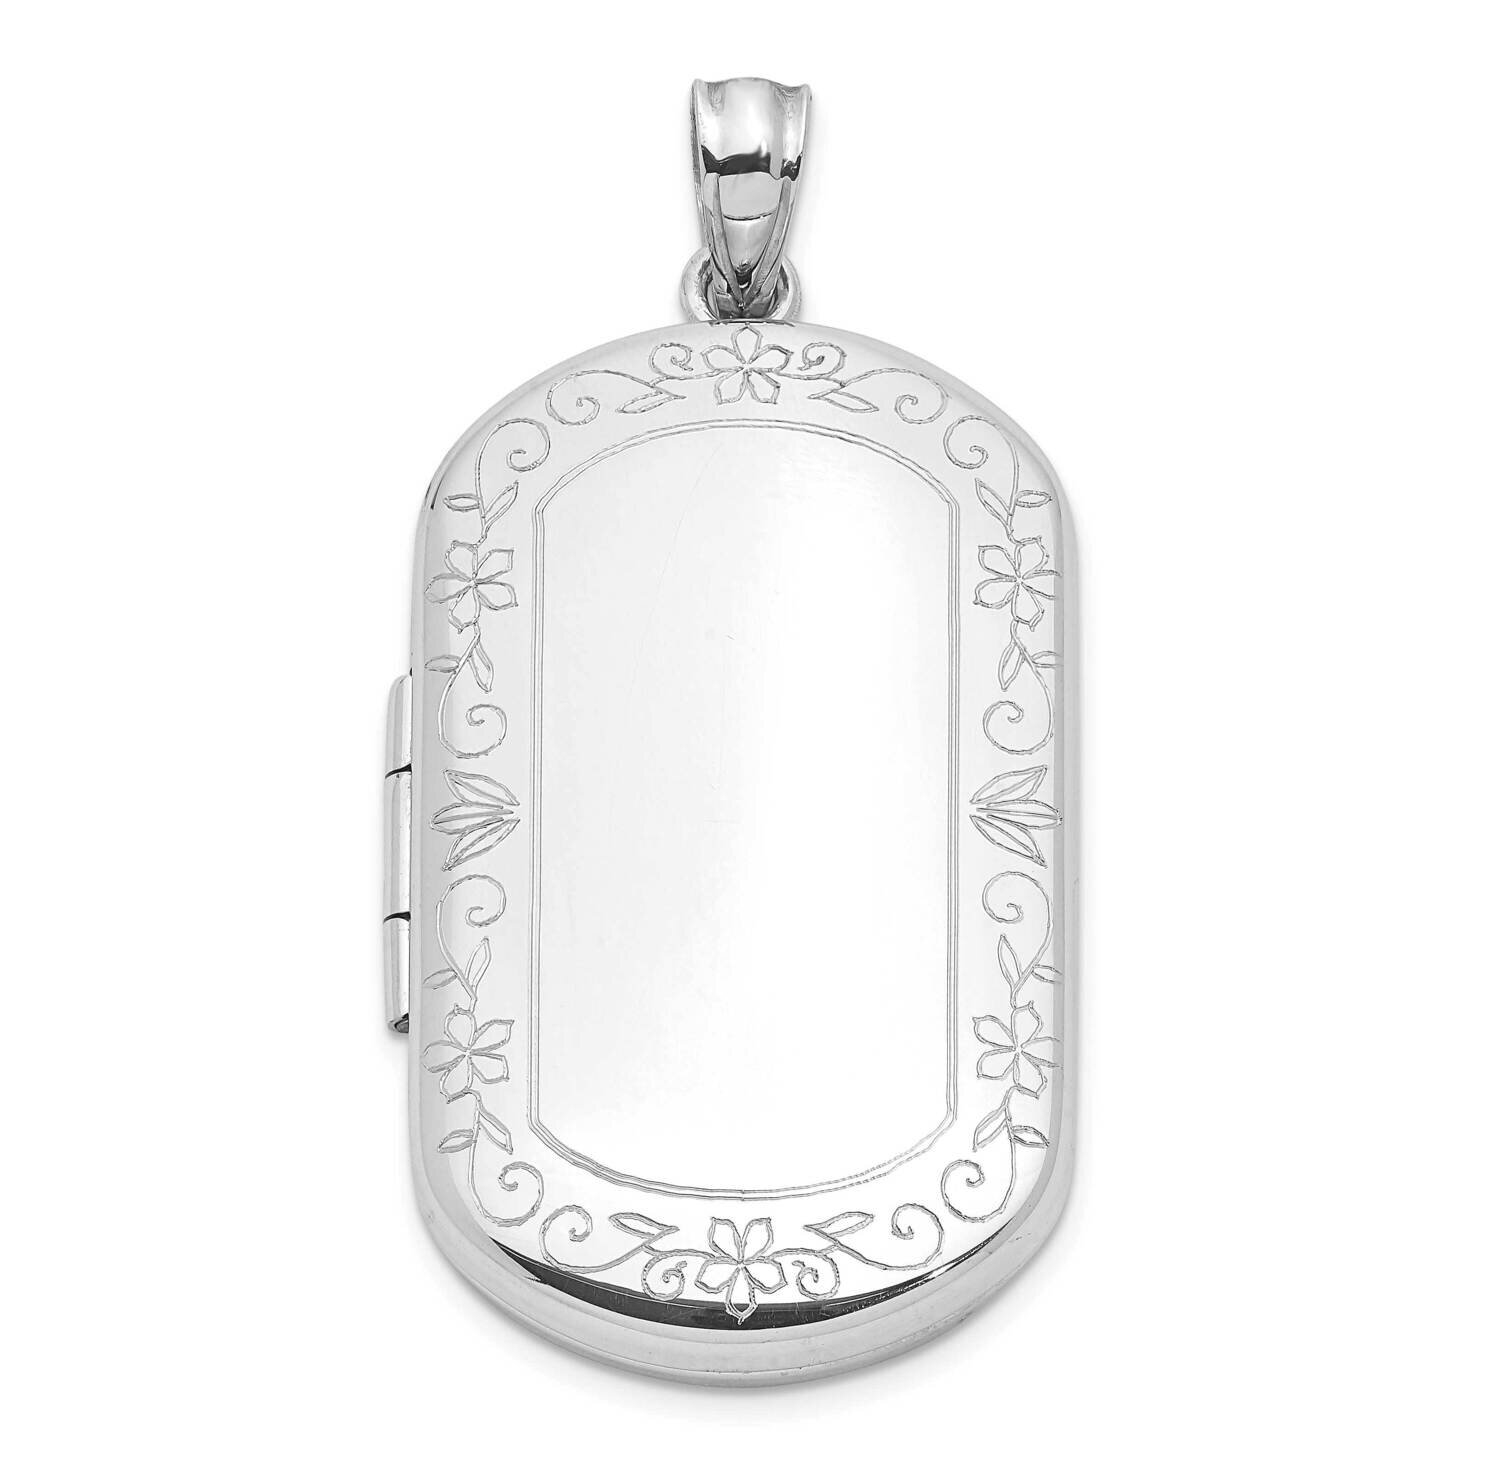 Scrolled Border 30X19mm Rectangle Locket Sterling Silver Rhodium-plated QLS1089